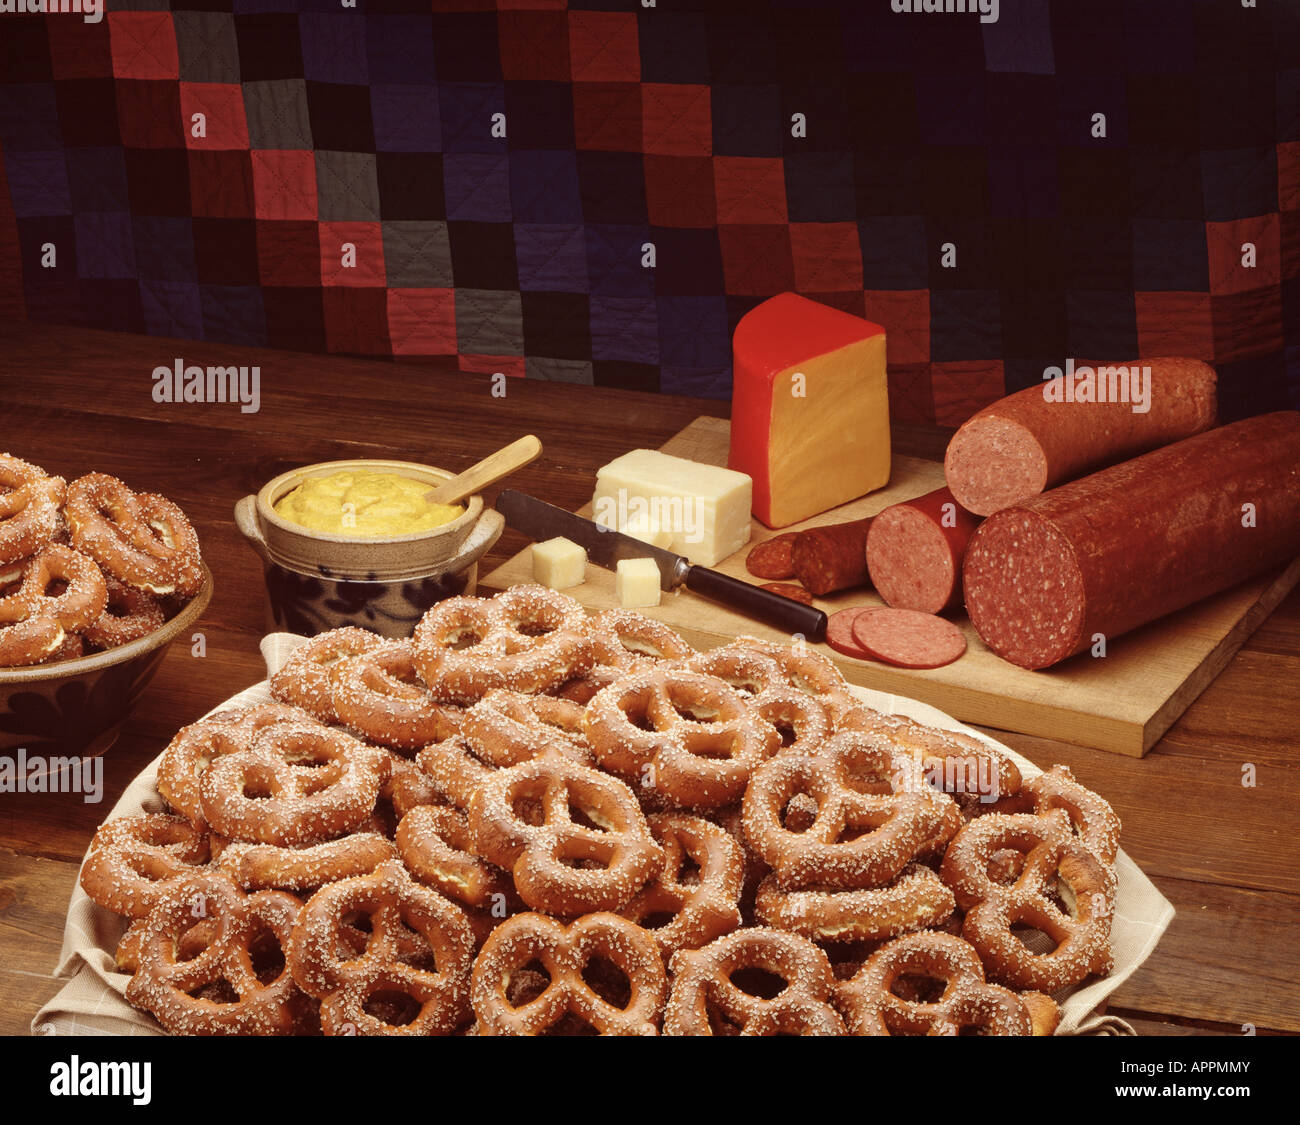 Snack food hard pretzels cheese bologna mustard americana quilt Stock Photo